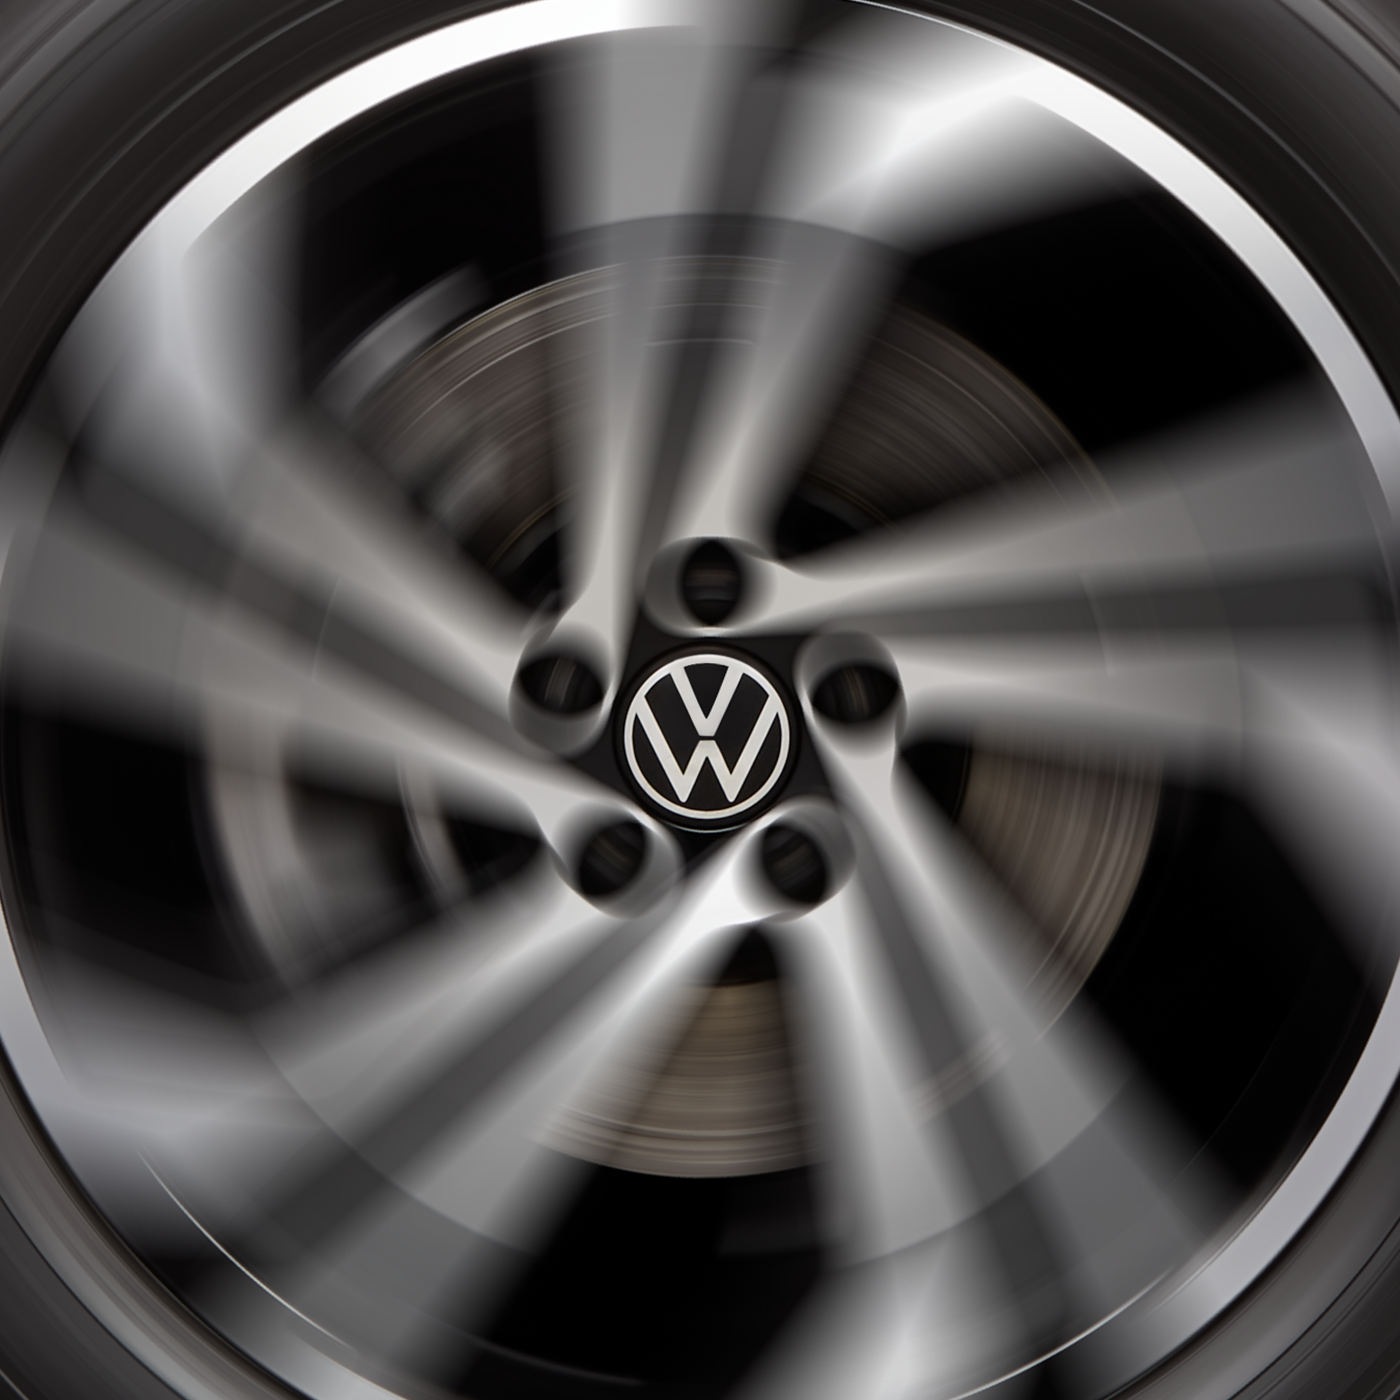 Volkswagen Dynamic Wheel Center Caps | VW Service and Parts